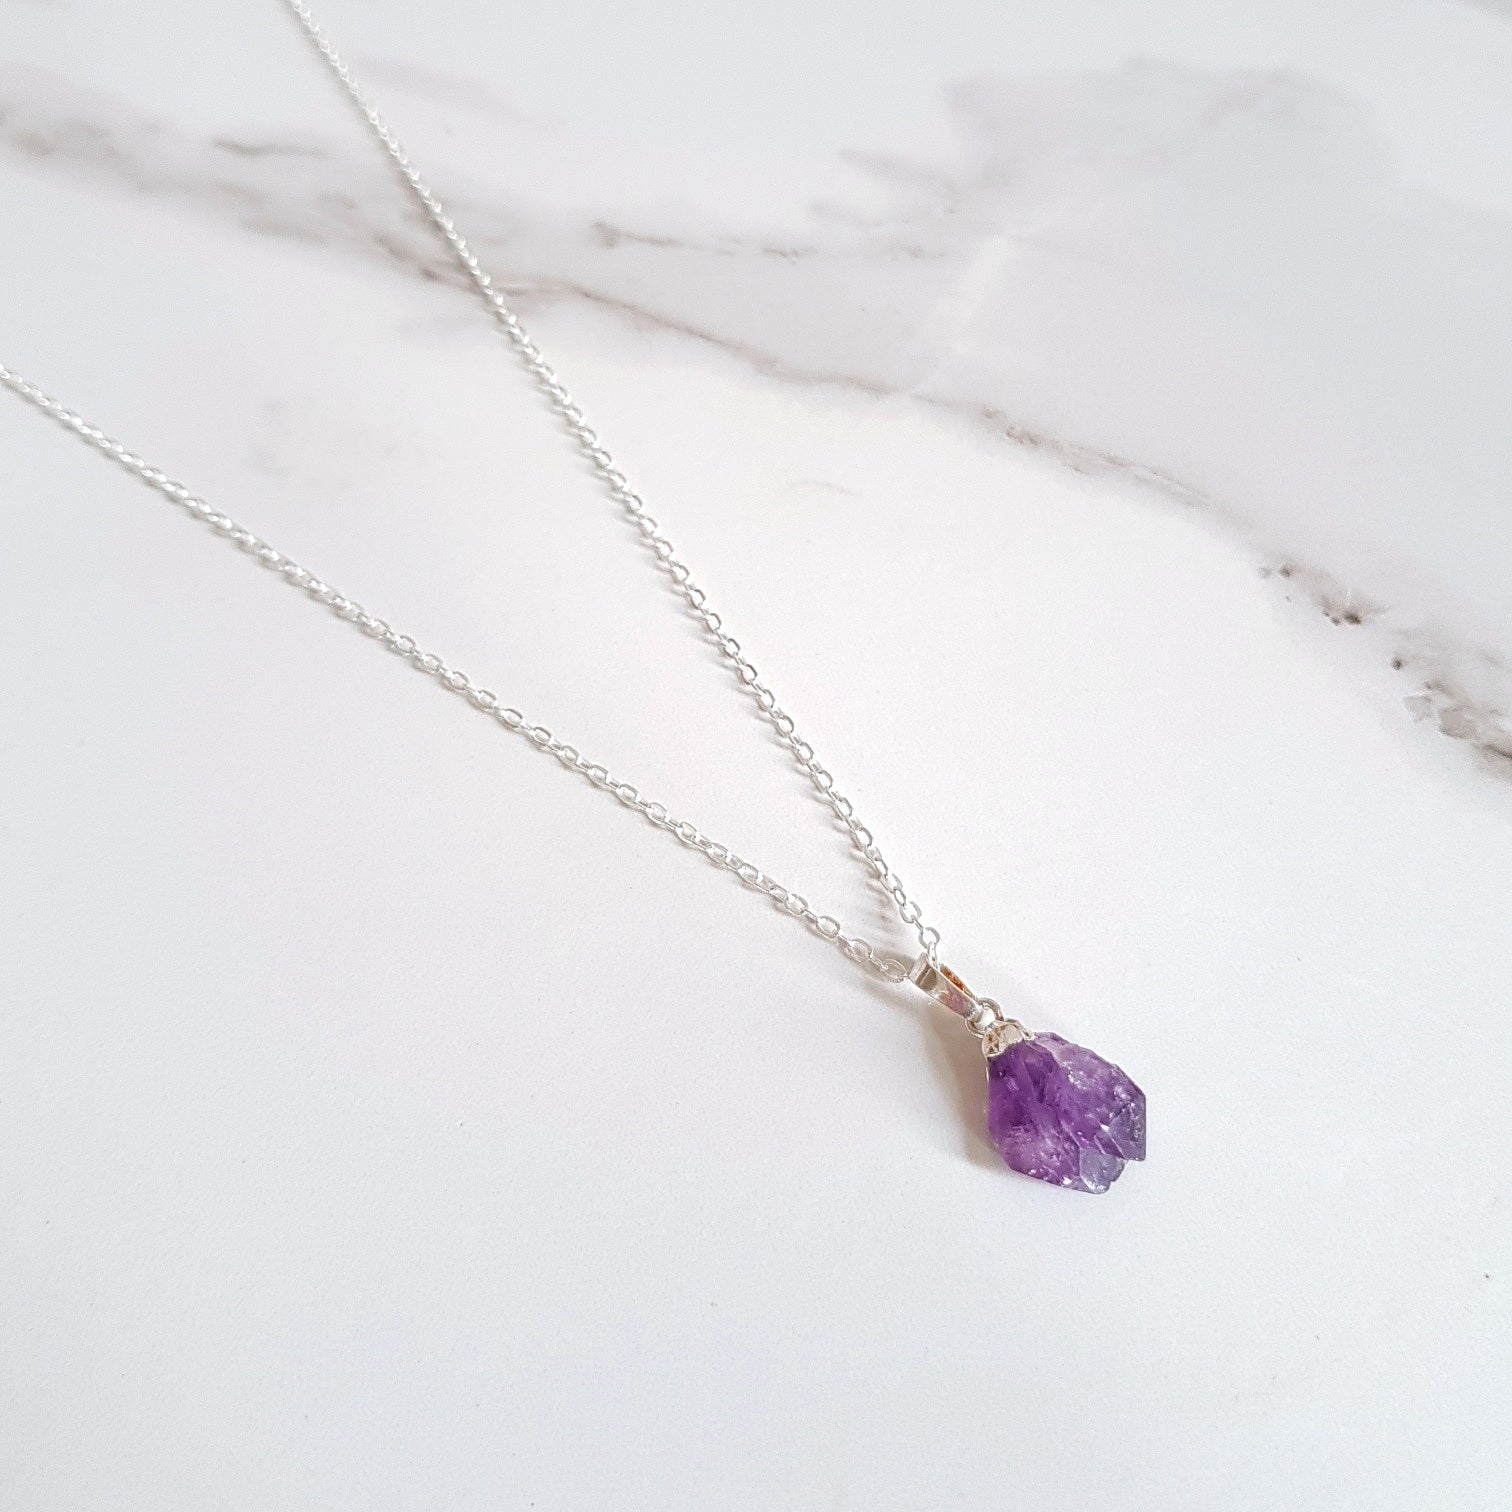 Wise Dainty Necklace - Amethyst